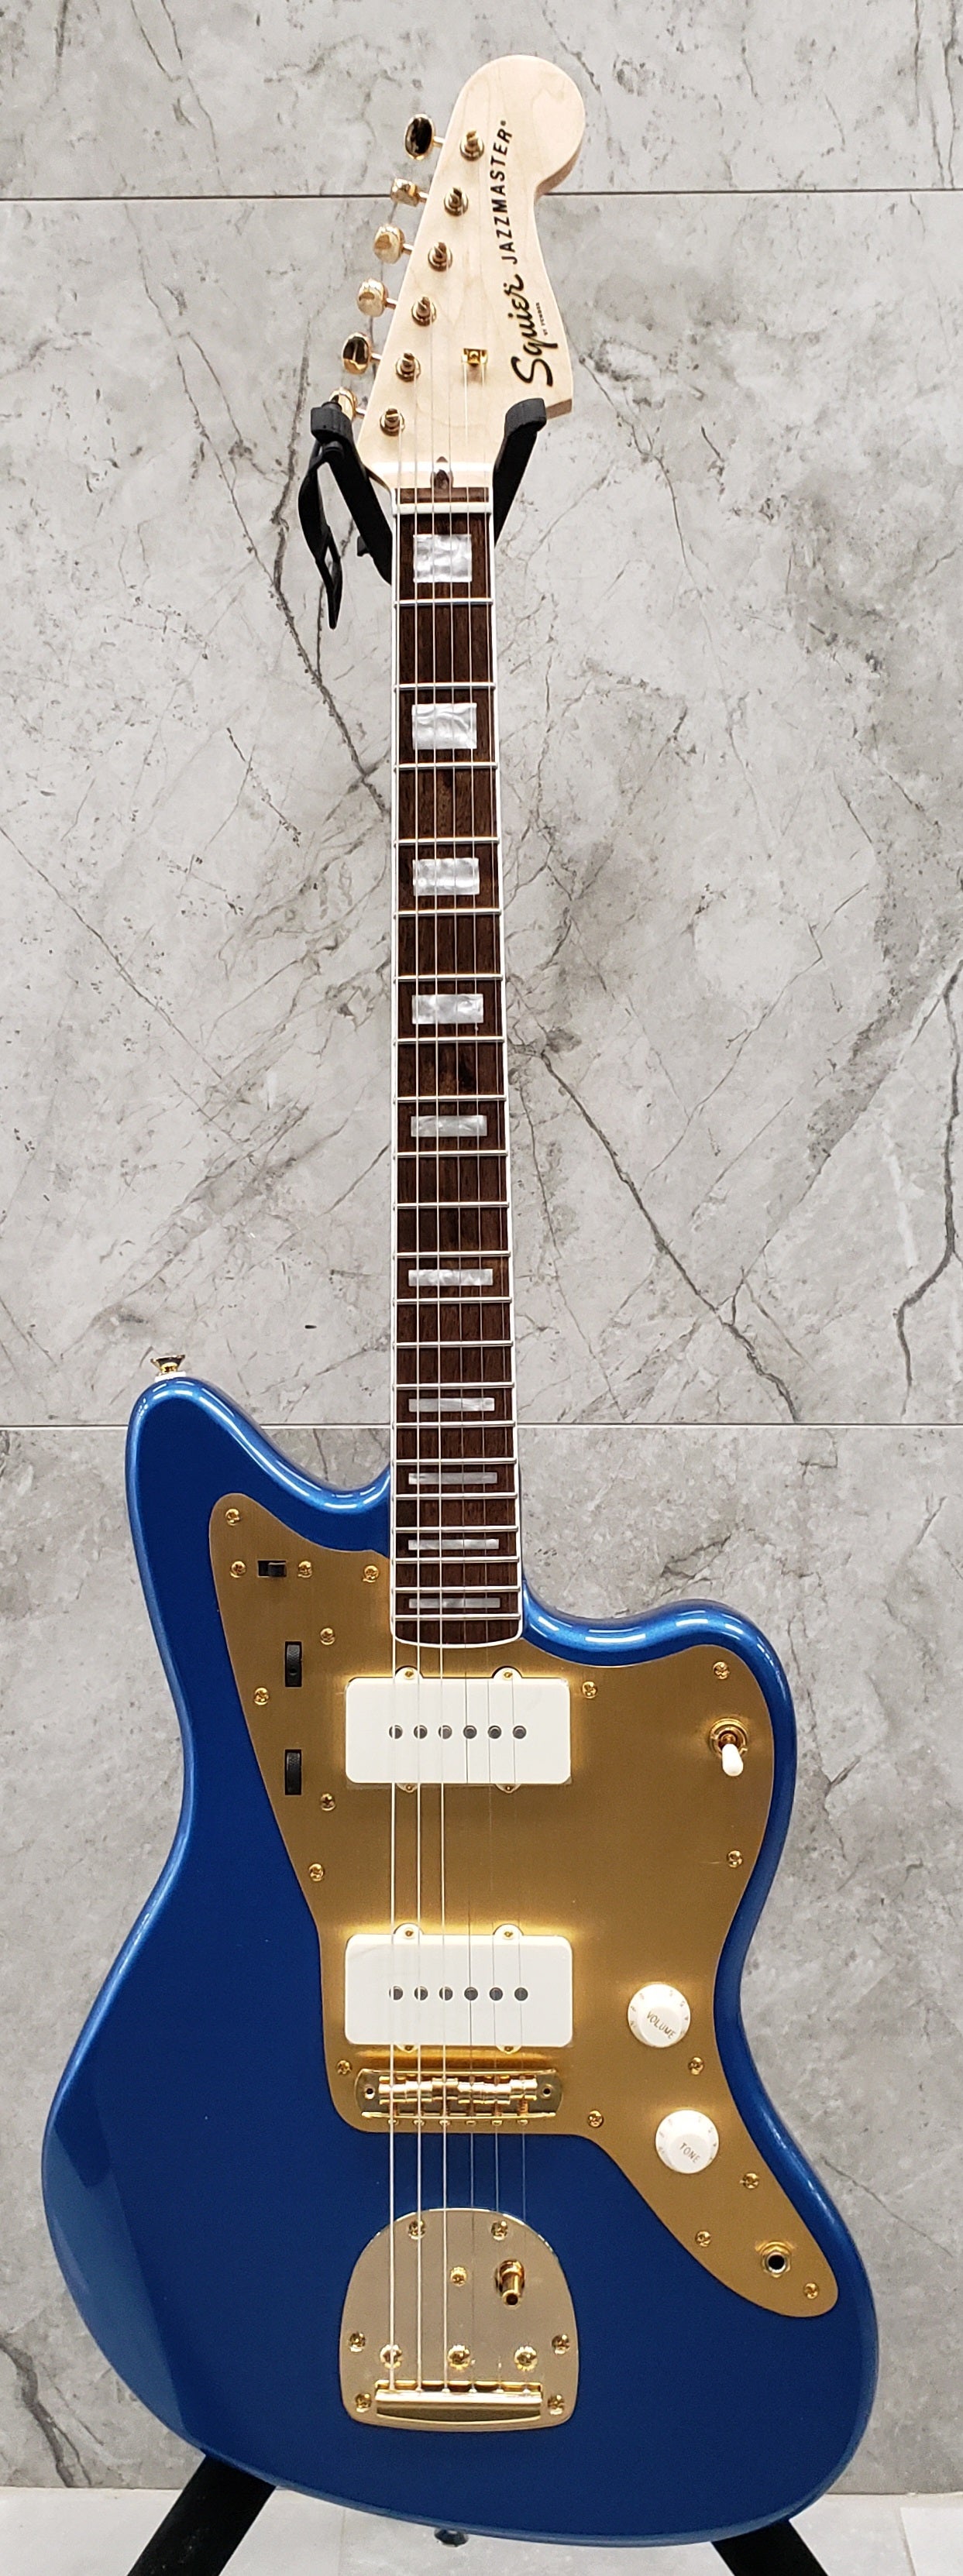 SQUIER 40th Anniversary Jazzmaster Gold Edition Gold Anodized Pickguard, Lake Placid Blue 0379420502 SERIAL NUMBER ICSA22046949 - 7.6 LBS